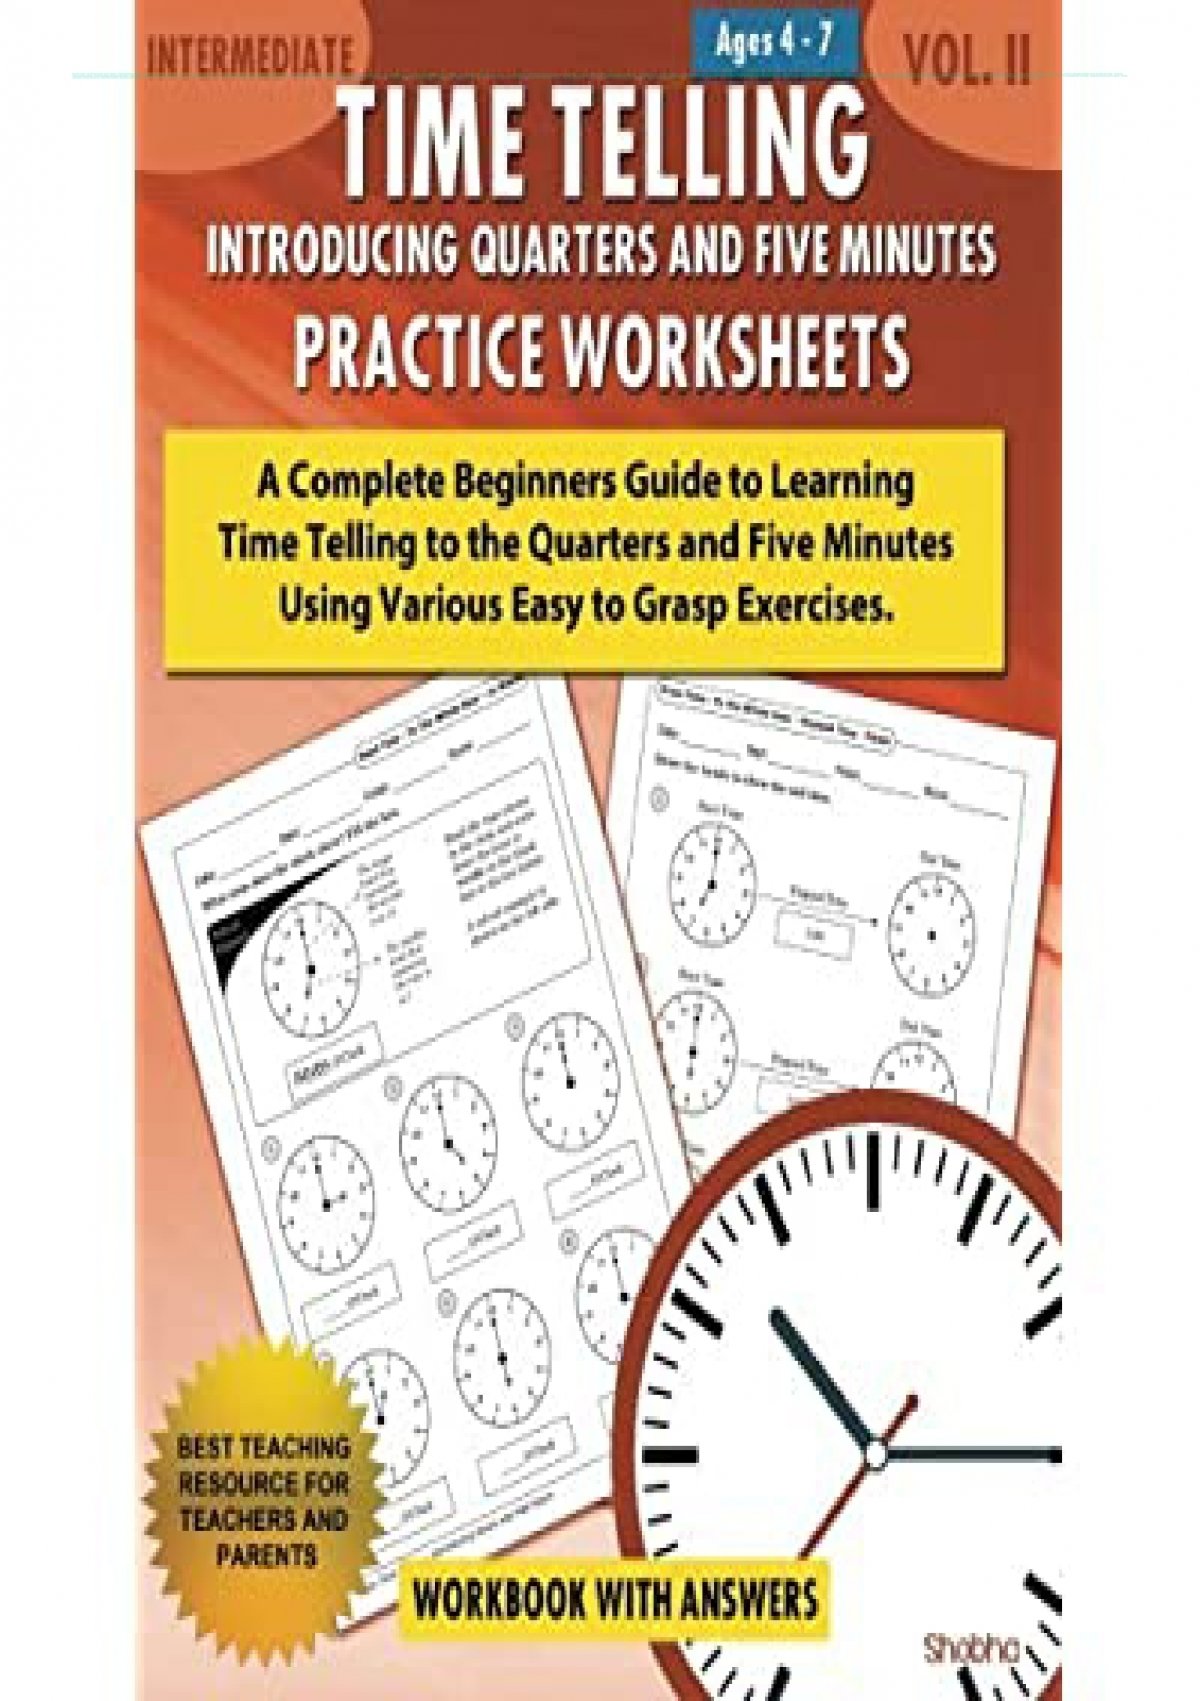 Pdf Time Telling Introducing Quarters And Five Minutes Practice Worksheets Workbook With 3775